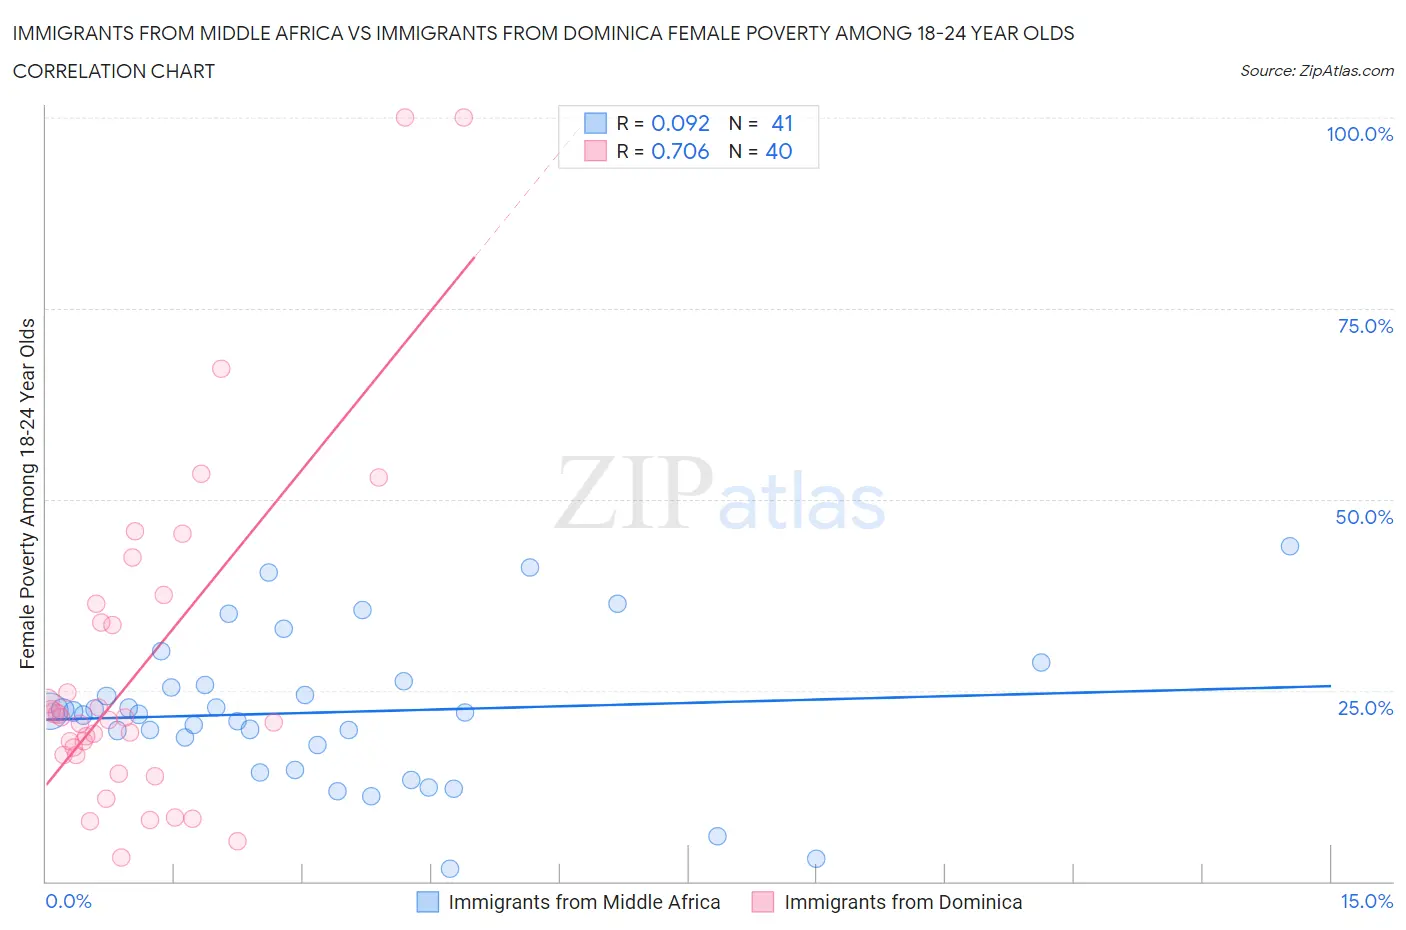 Immigrants from Middle Africa vs Immigrants from Dominica Female Poverty Among 18-24 Year Olds